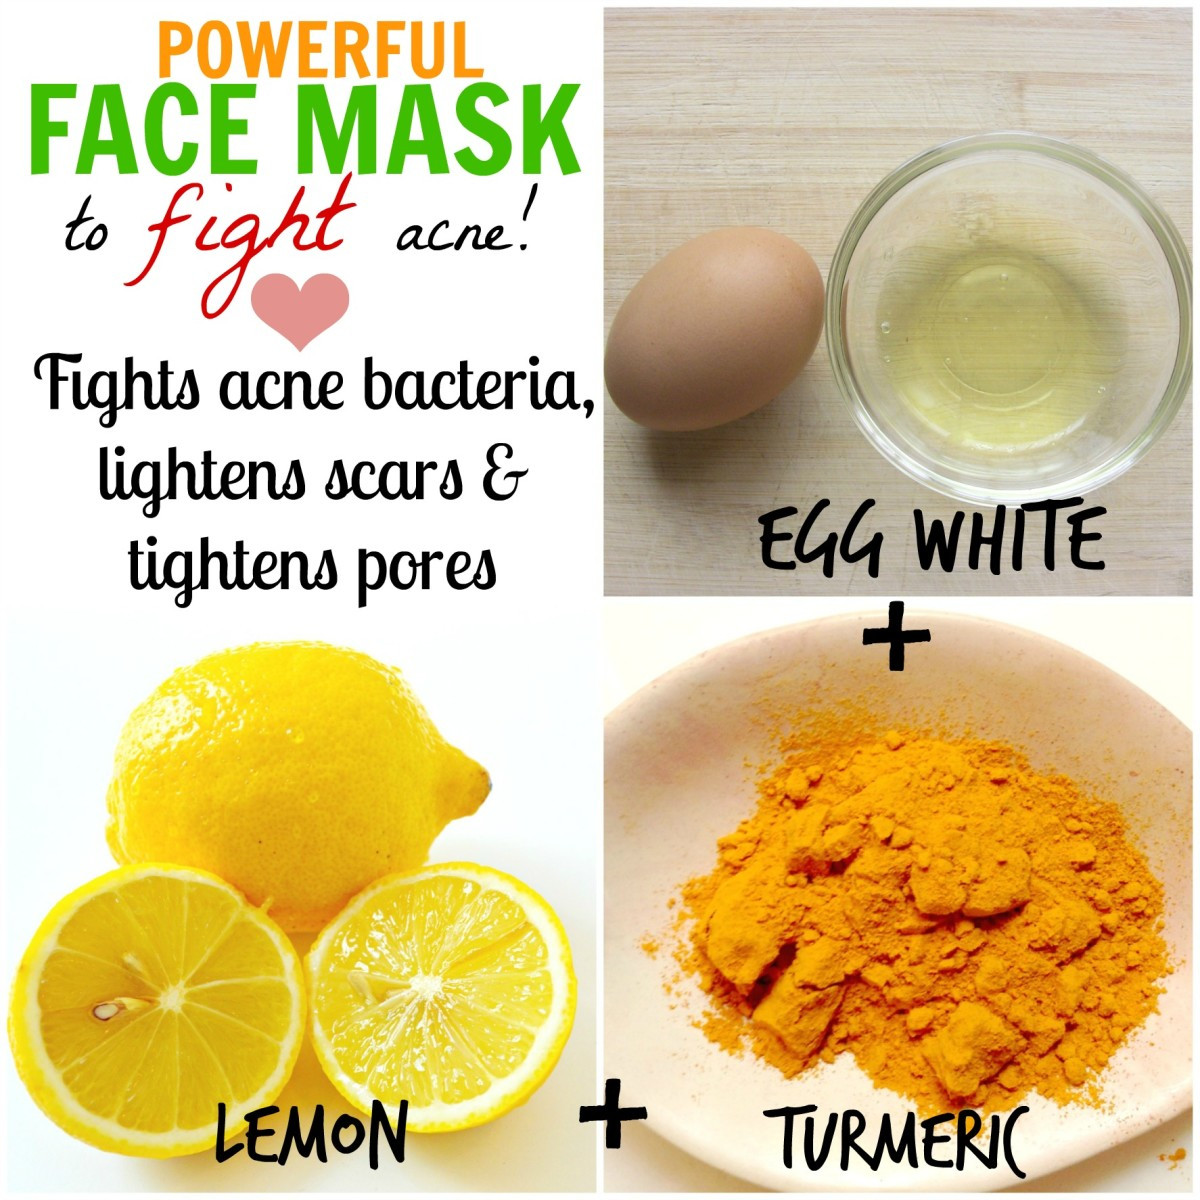 DIY Face Mask For Pimples
 DIY Homemade Face Masks for Acne How to Stop Pimples